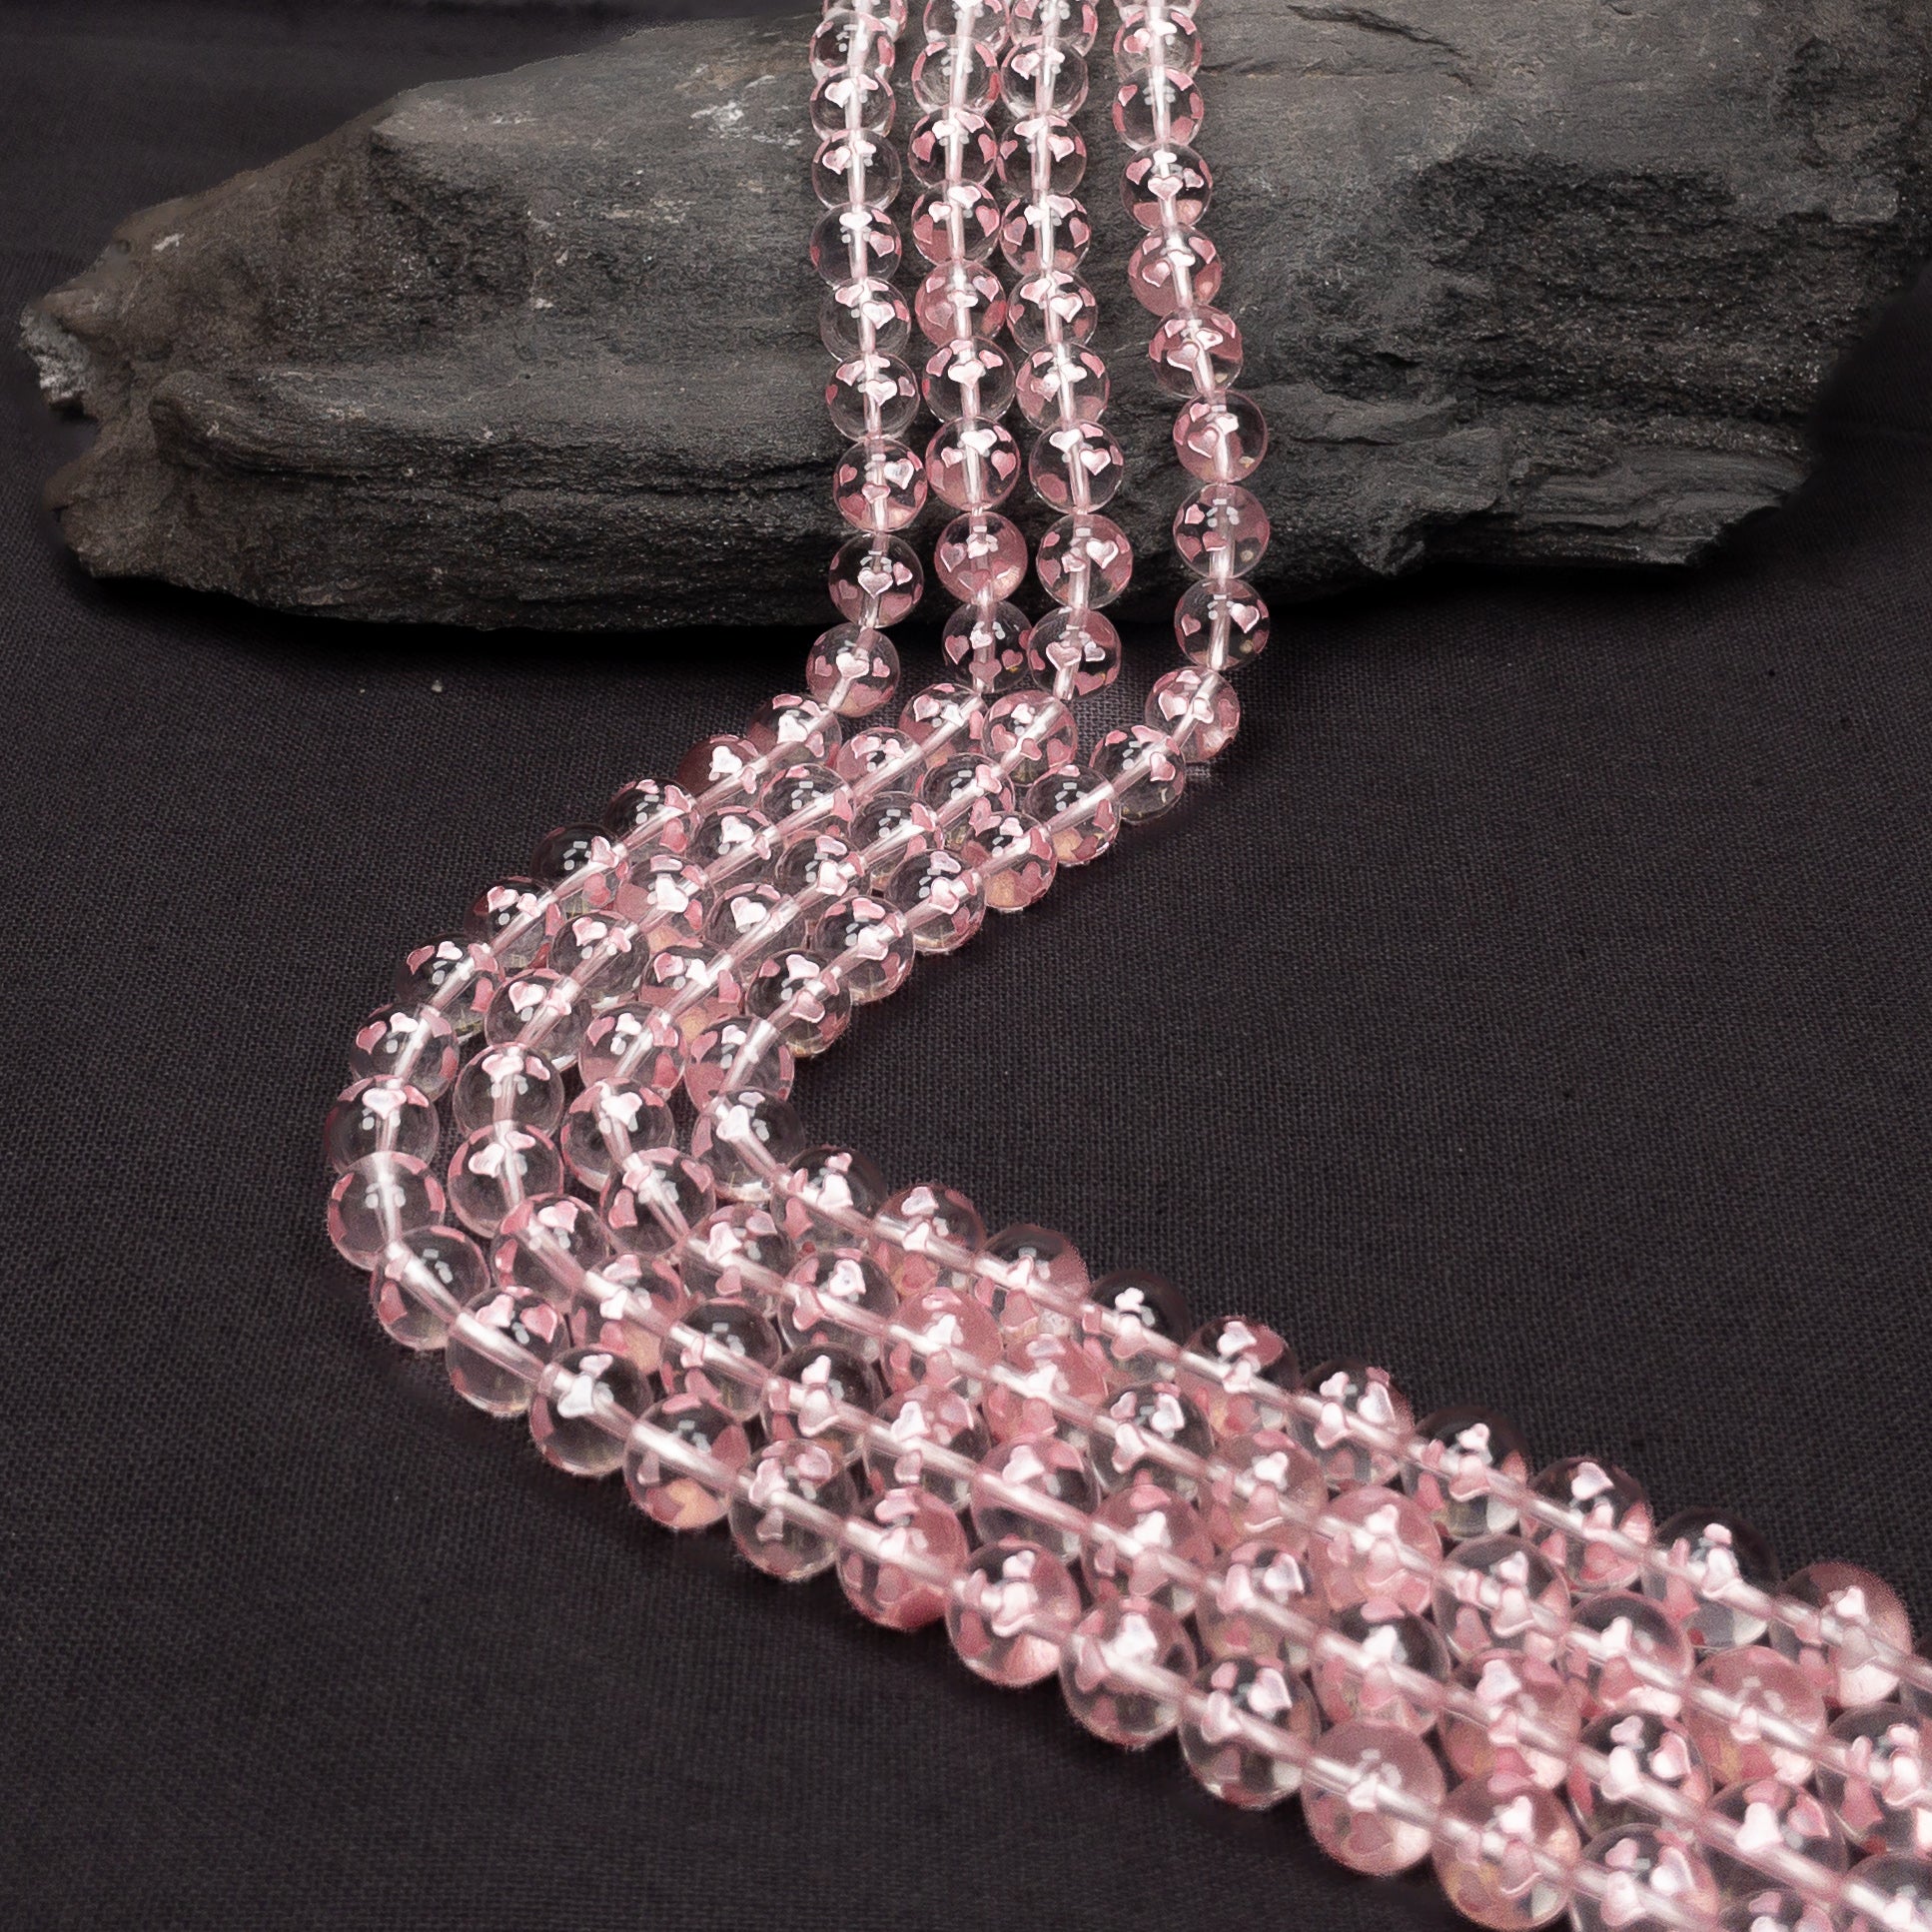 LOVE BUBBLES: Crystal Quartz Etched Pink Hearts 10mm Round Bead - 7.5" Strand